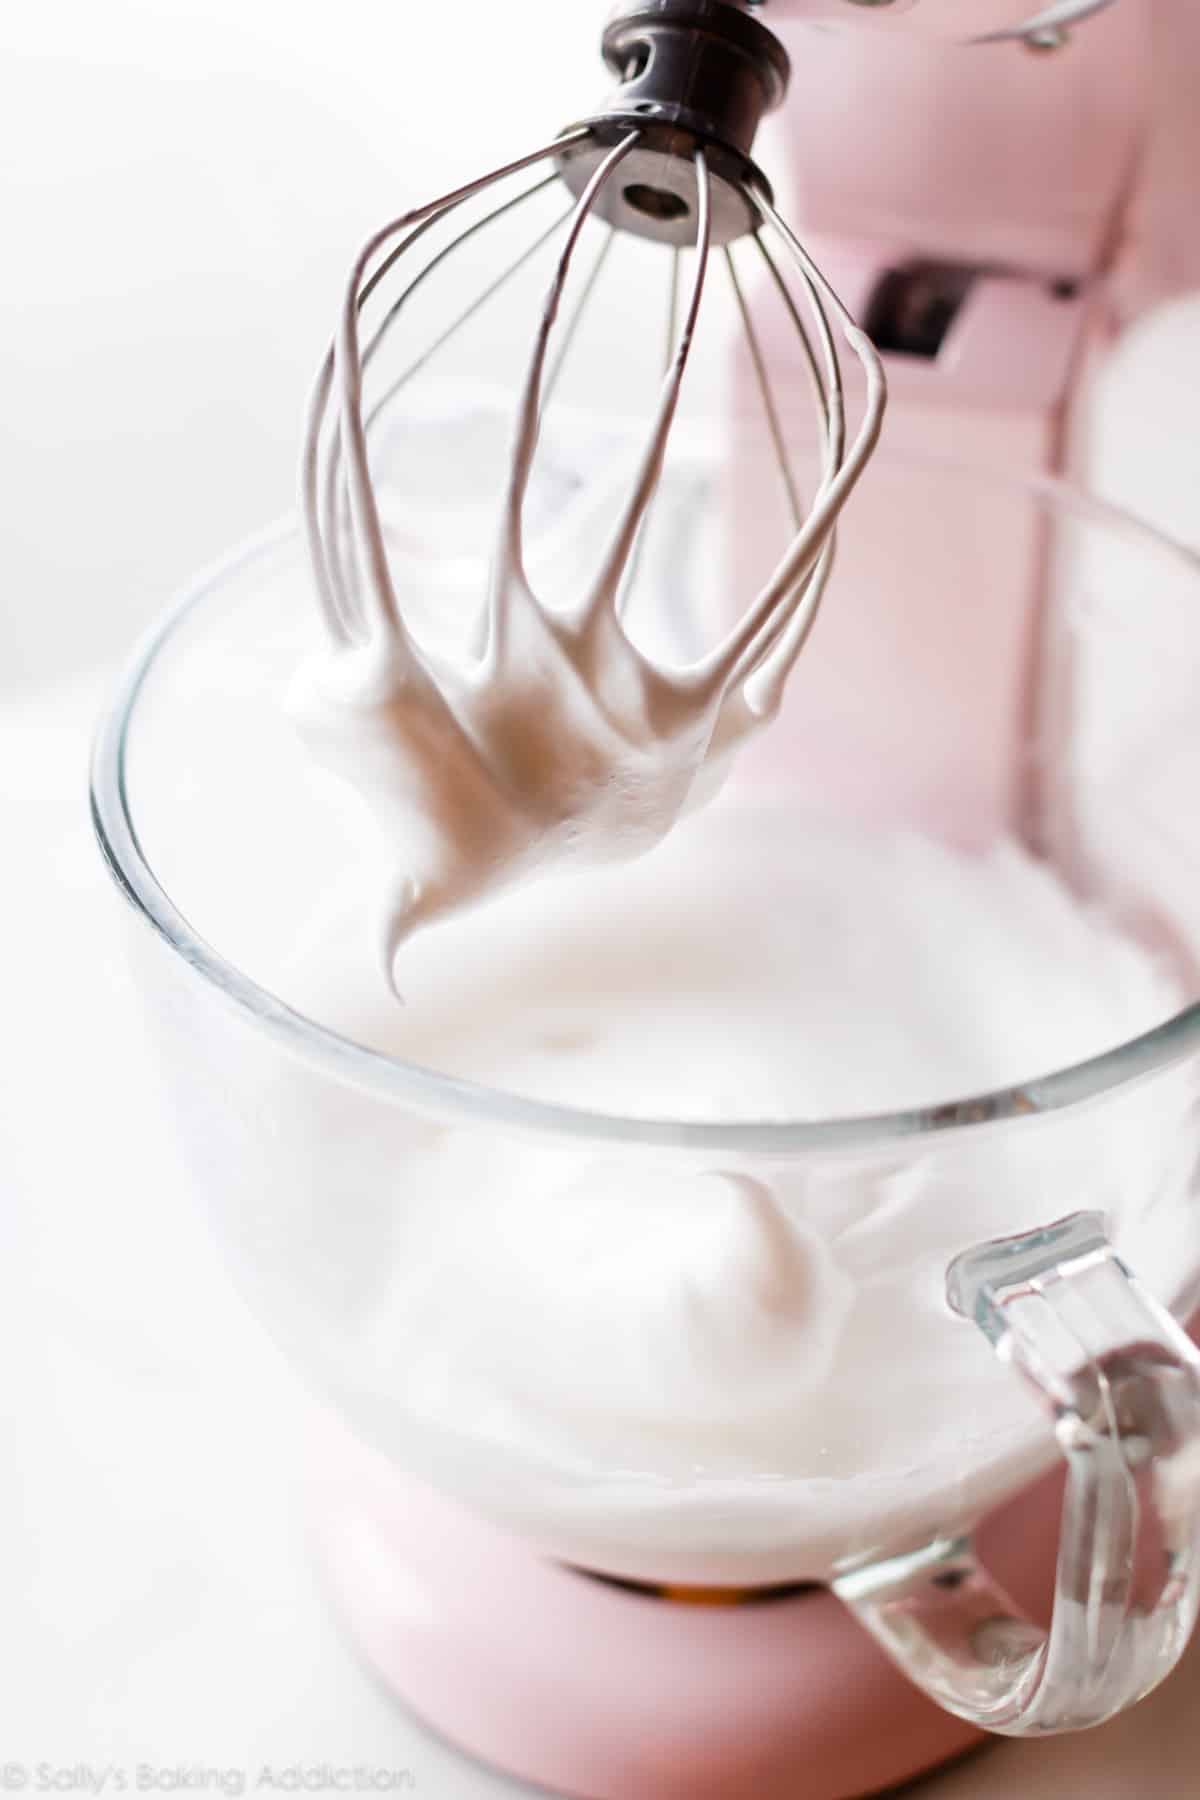 Whipped egg whites in a glass stand mixer bowl